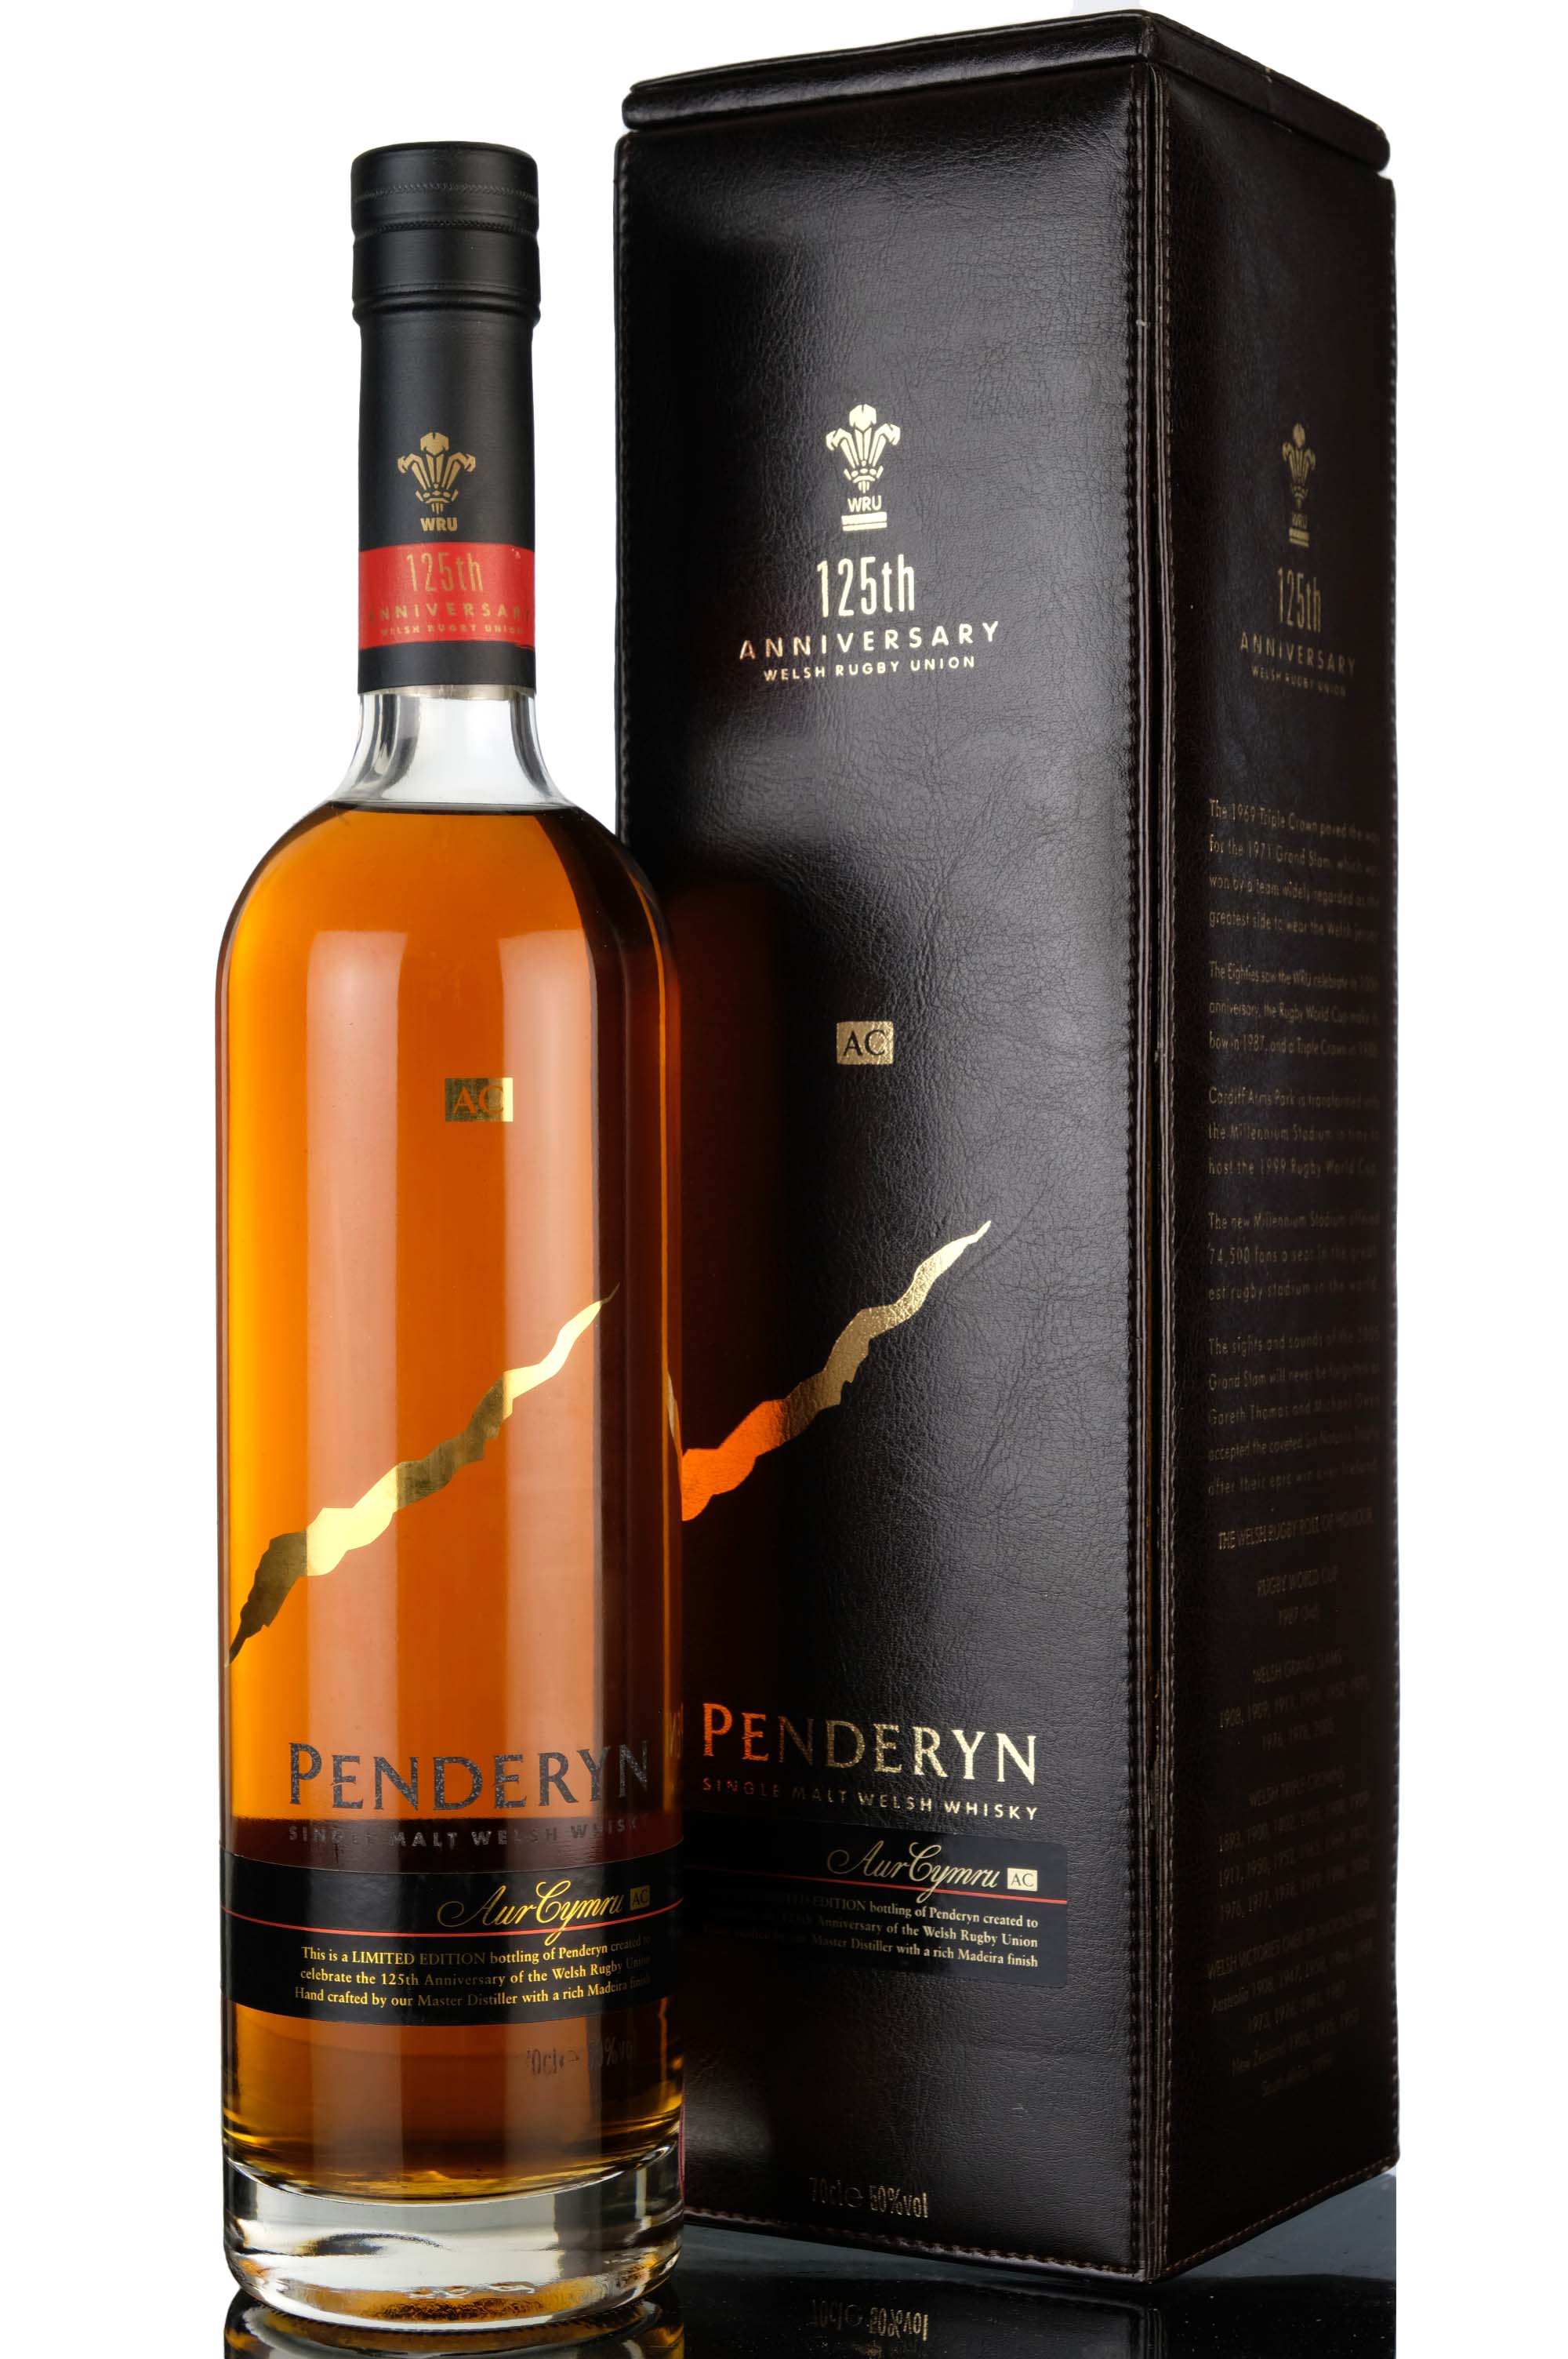 Penderyn 125th Anniversary Of The Welsh Rugby Union